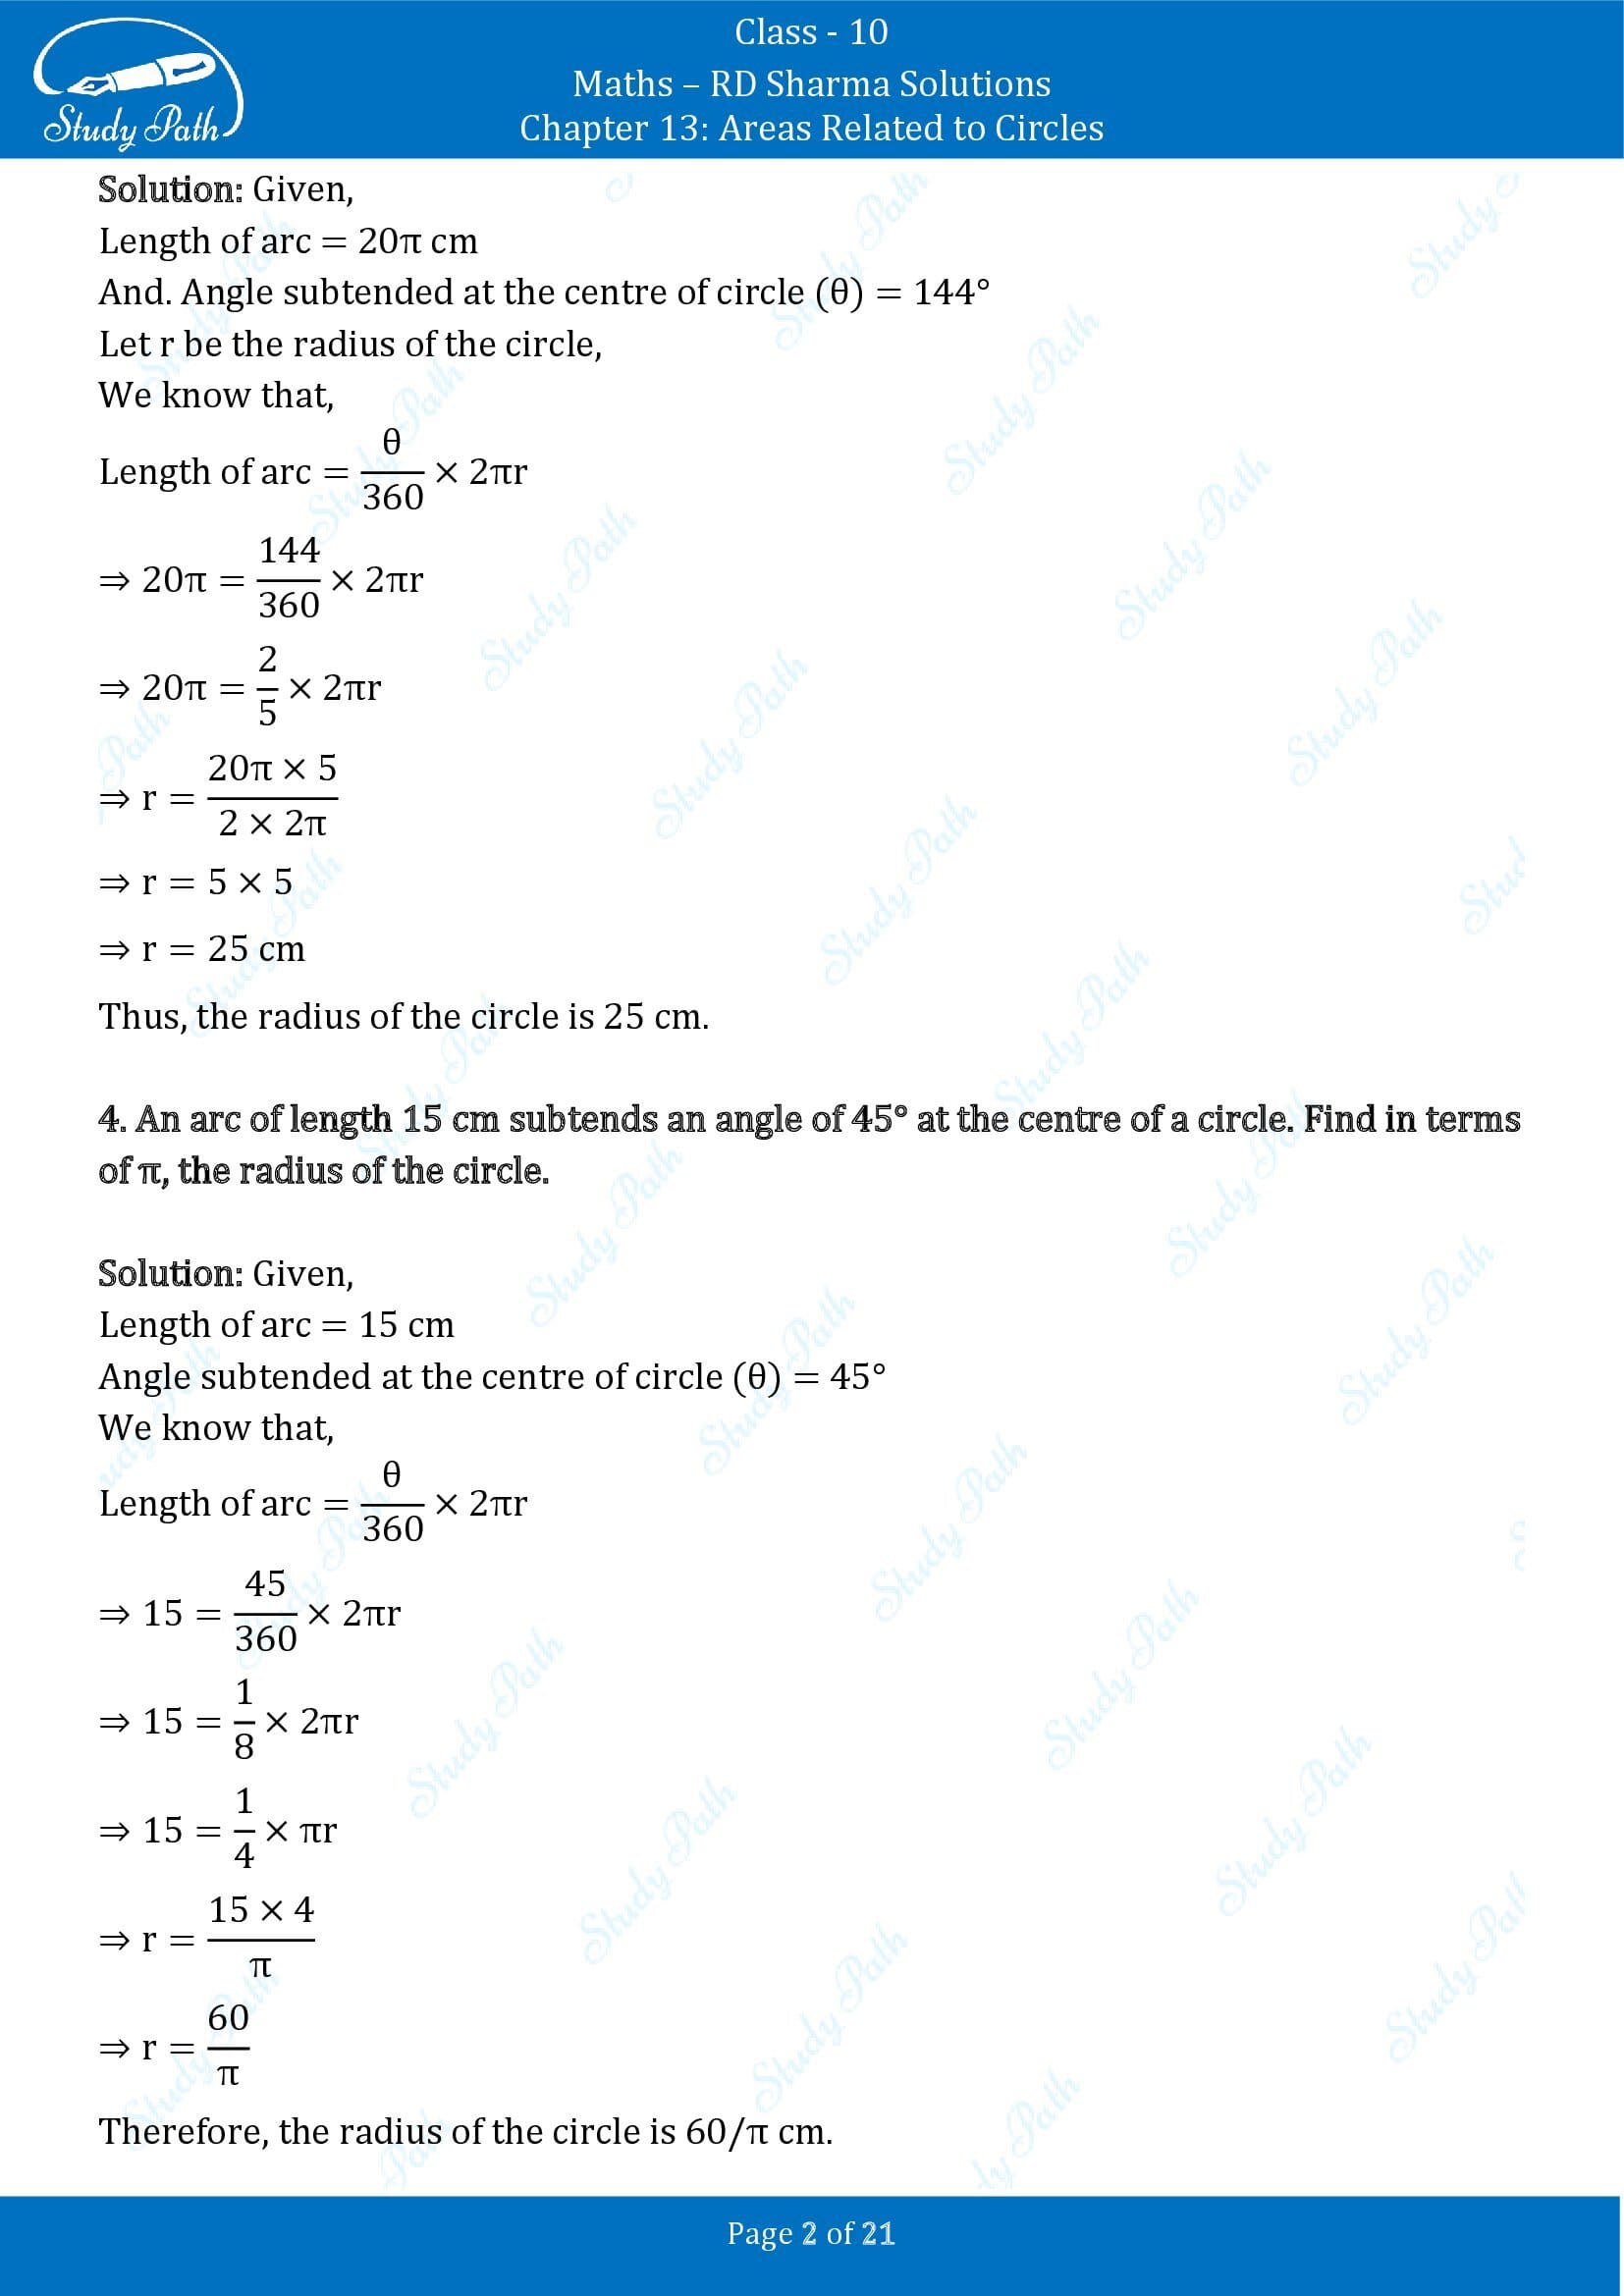 RD Sharma Solutions Class 10 Chapter 13 Areas Related to Circles Exercise 13.2 00002